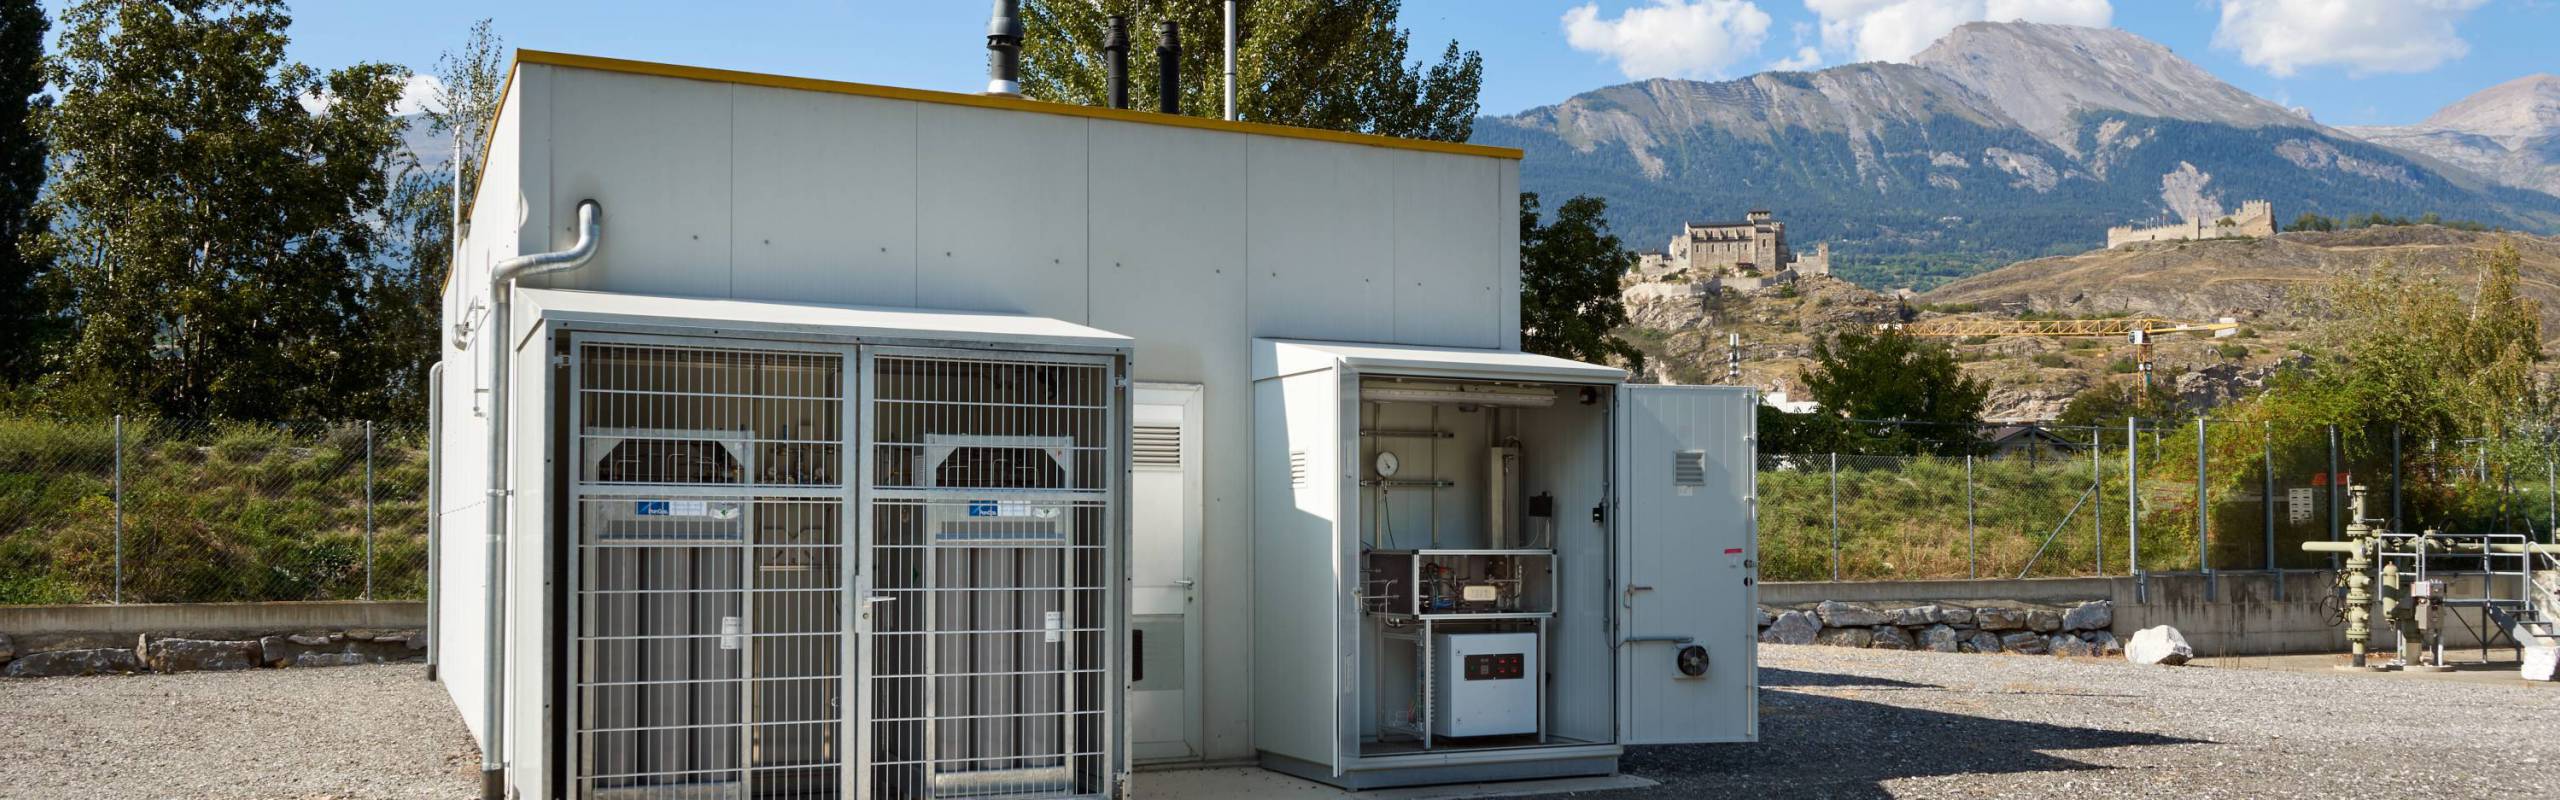 Installation power To gas (PtG) à Sion